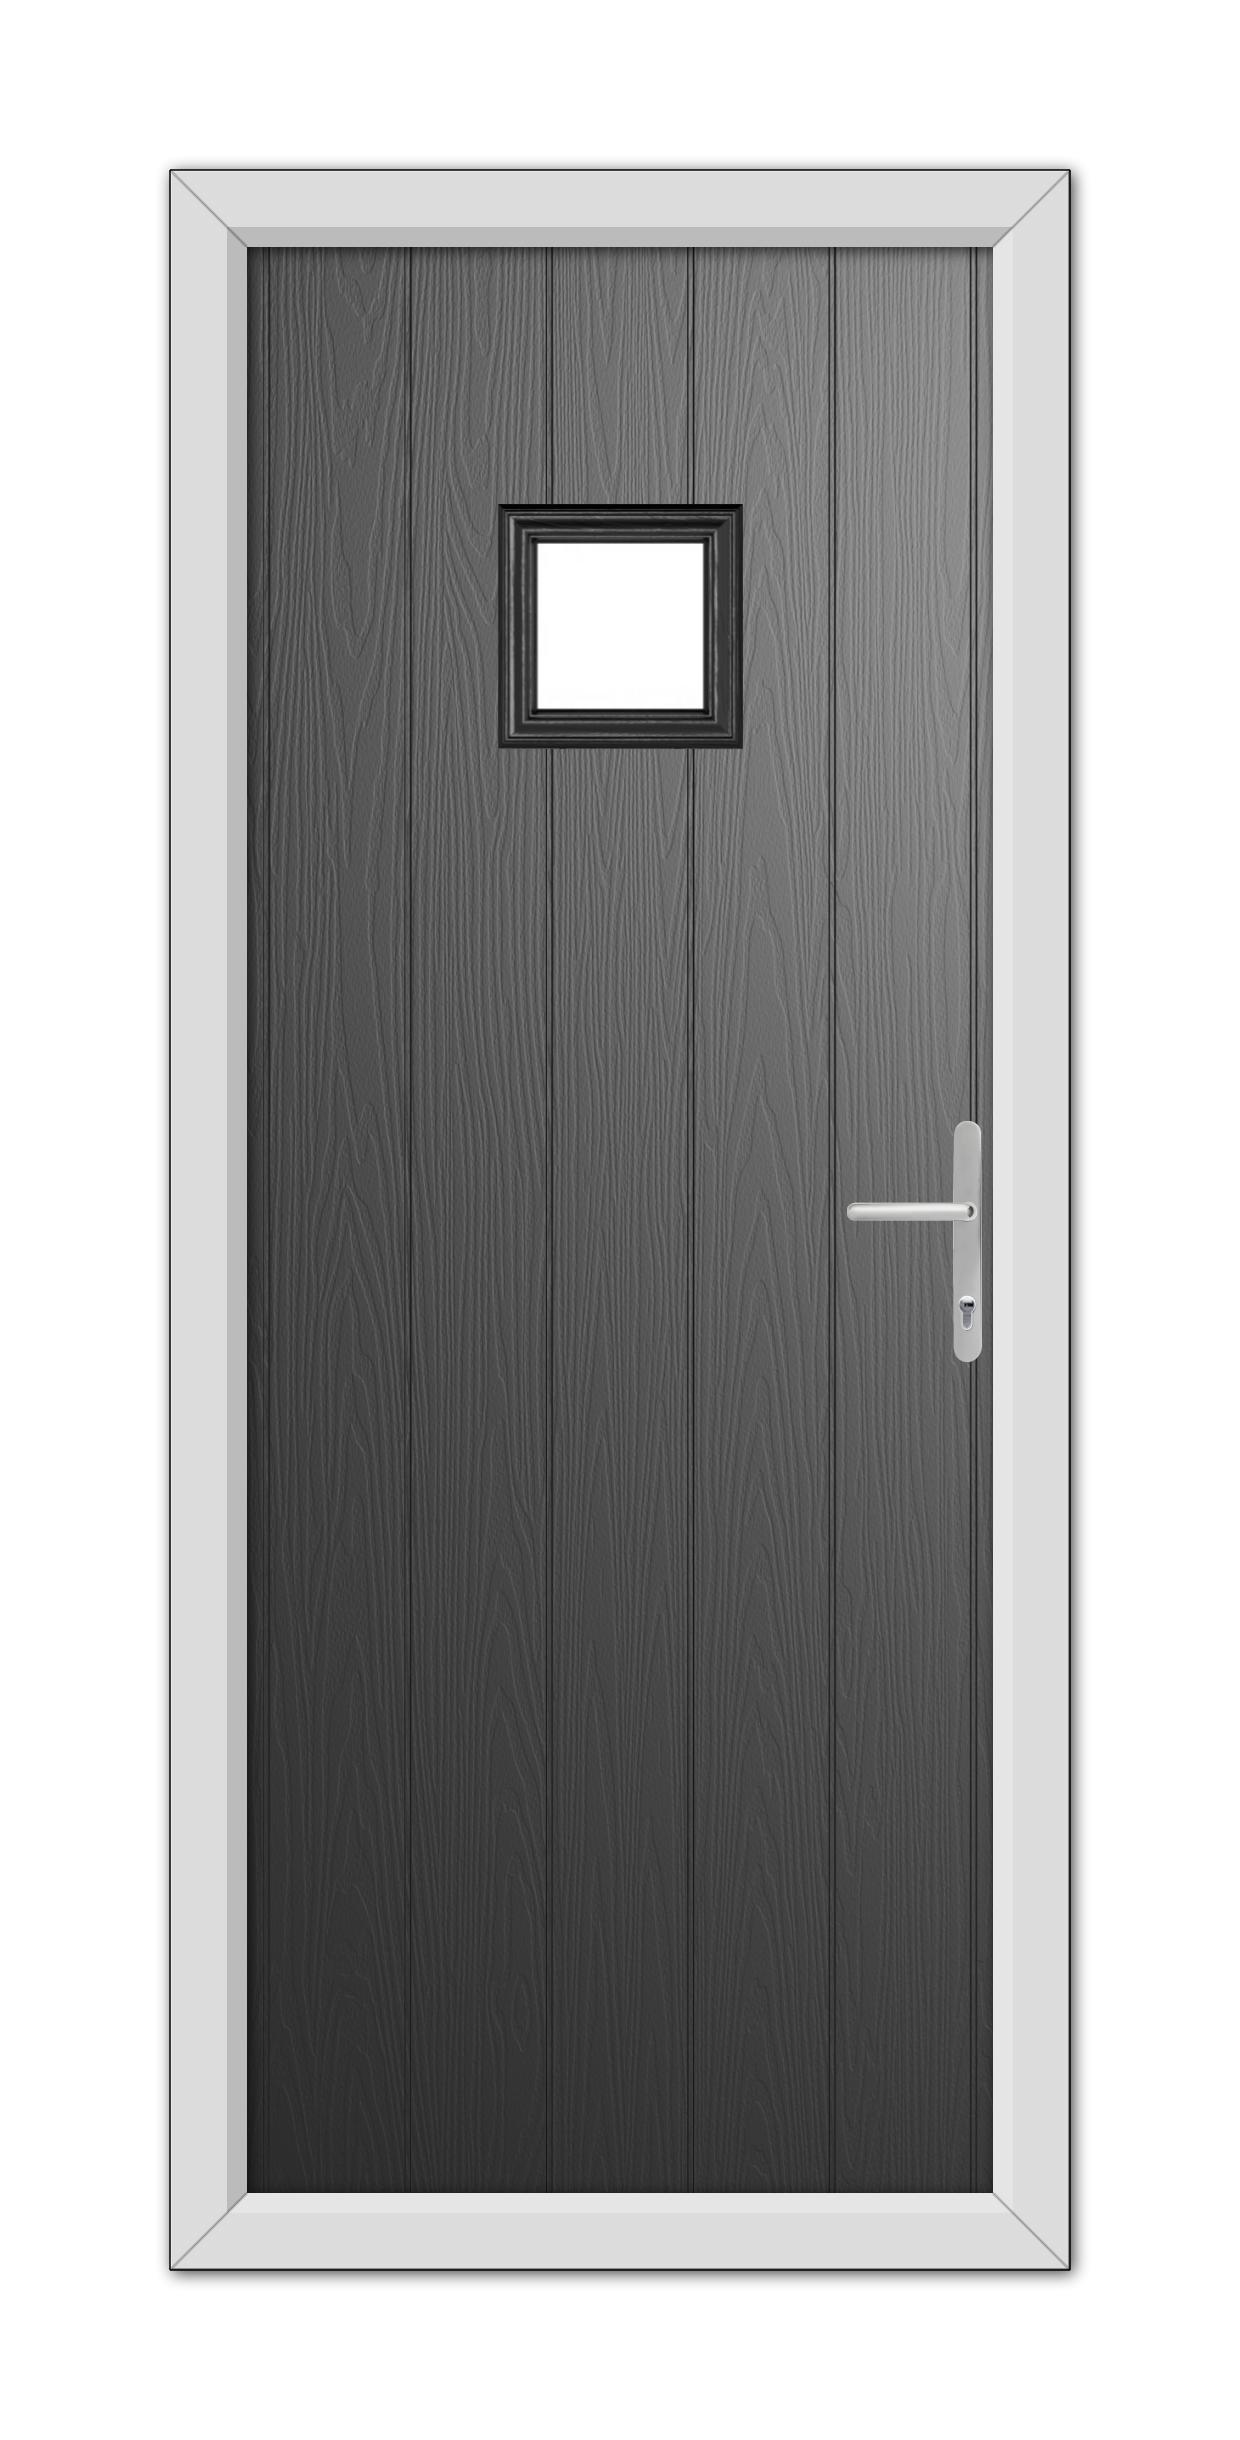 A modern, Black Brampton Composite Door 48mm Timber Core with a small rectangular window at the top, featuring a metallic handle and framed in white.